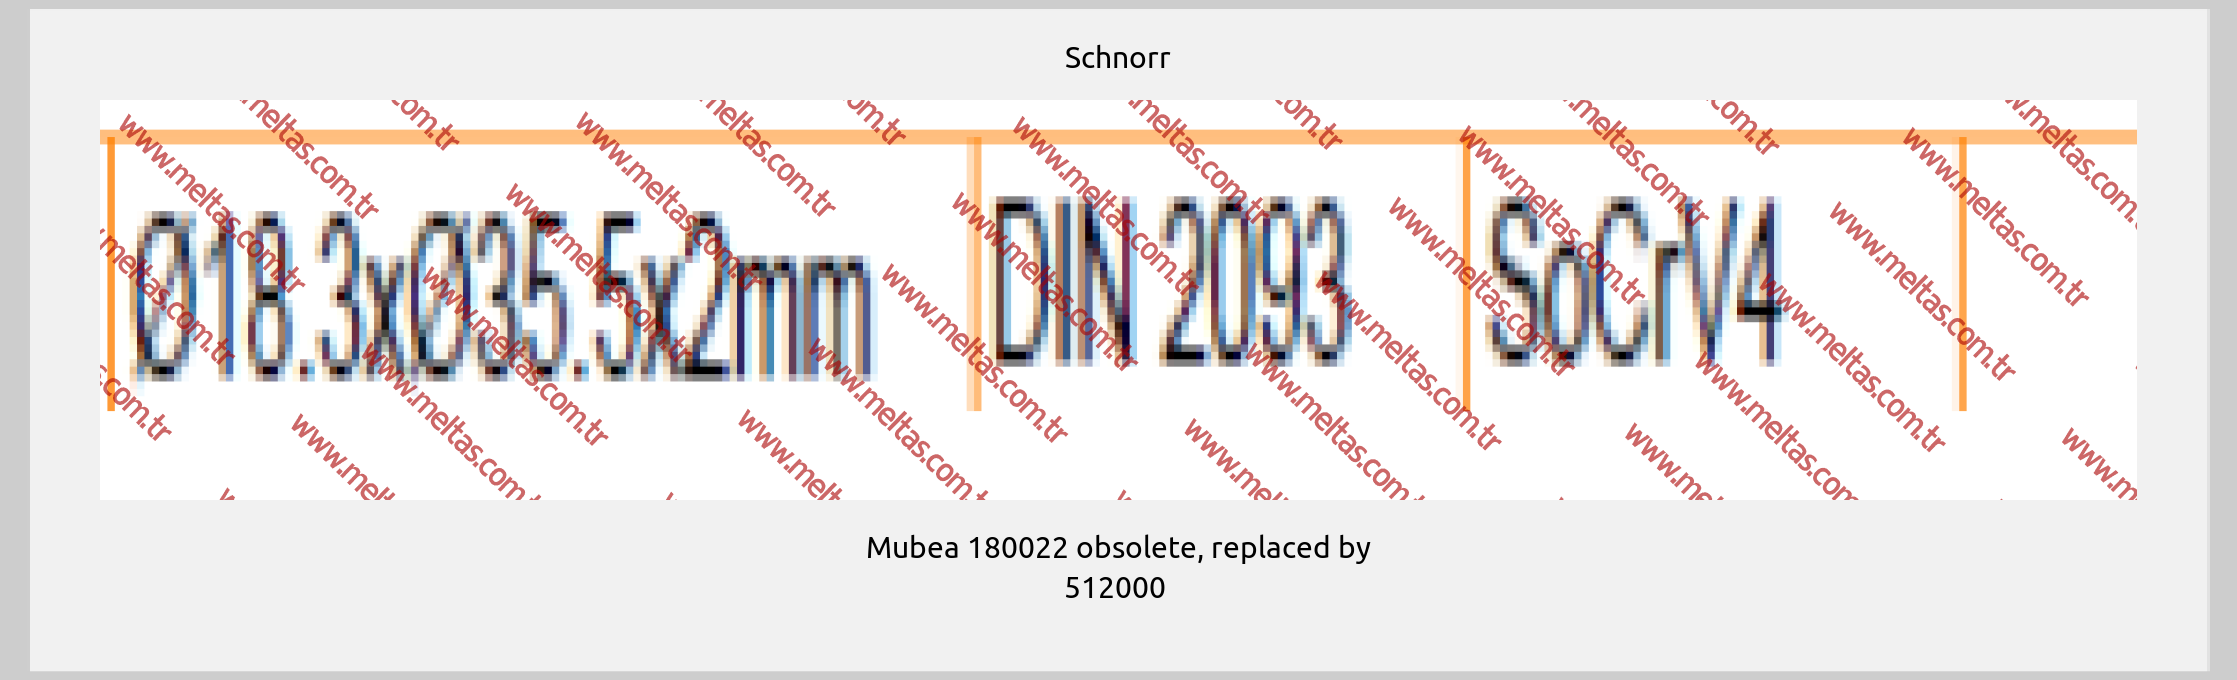 Schnorr - Mubea 180022 obsolete, replaced by 512000 